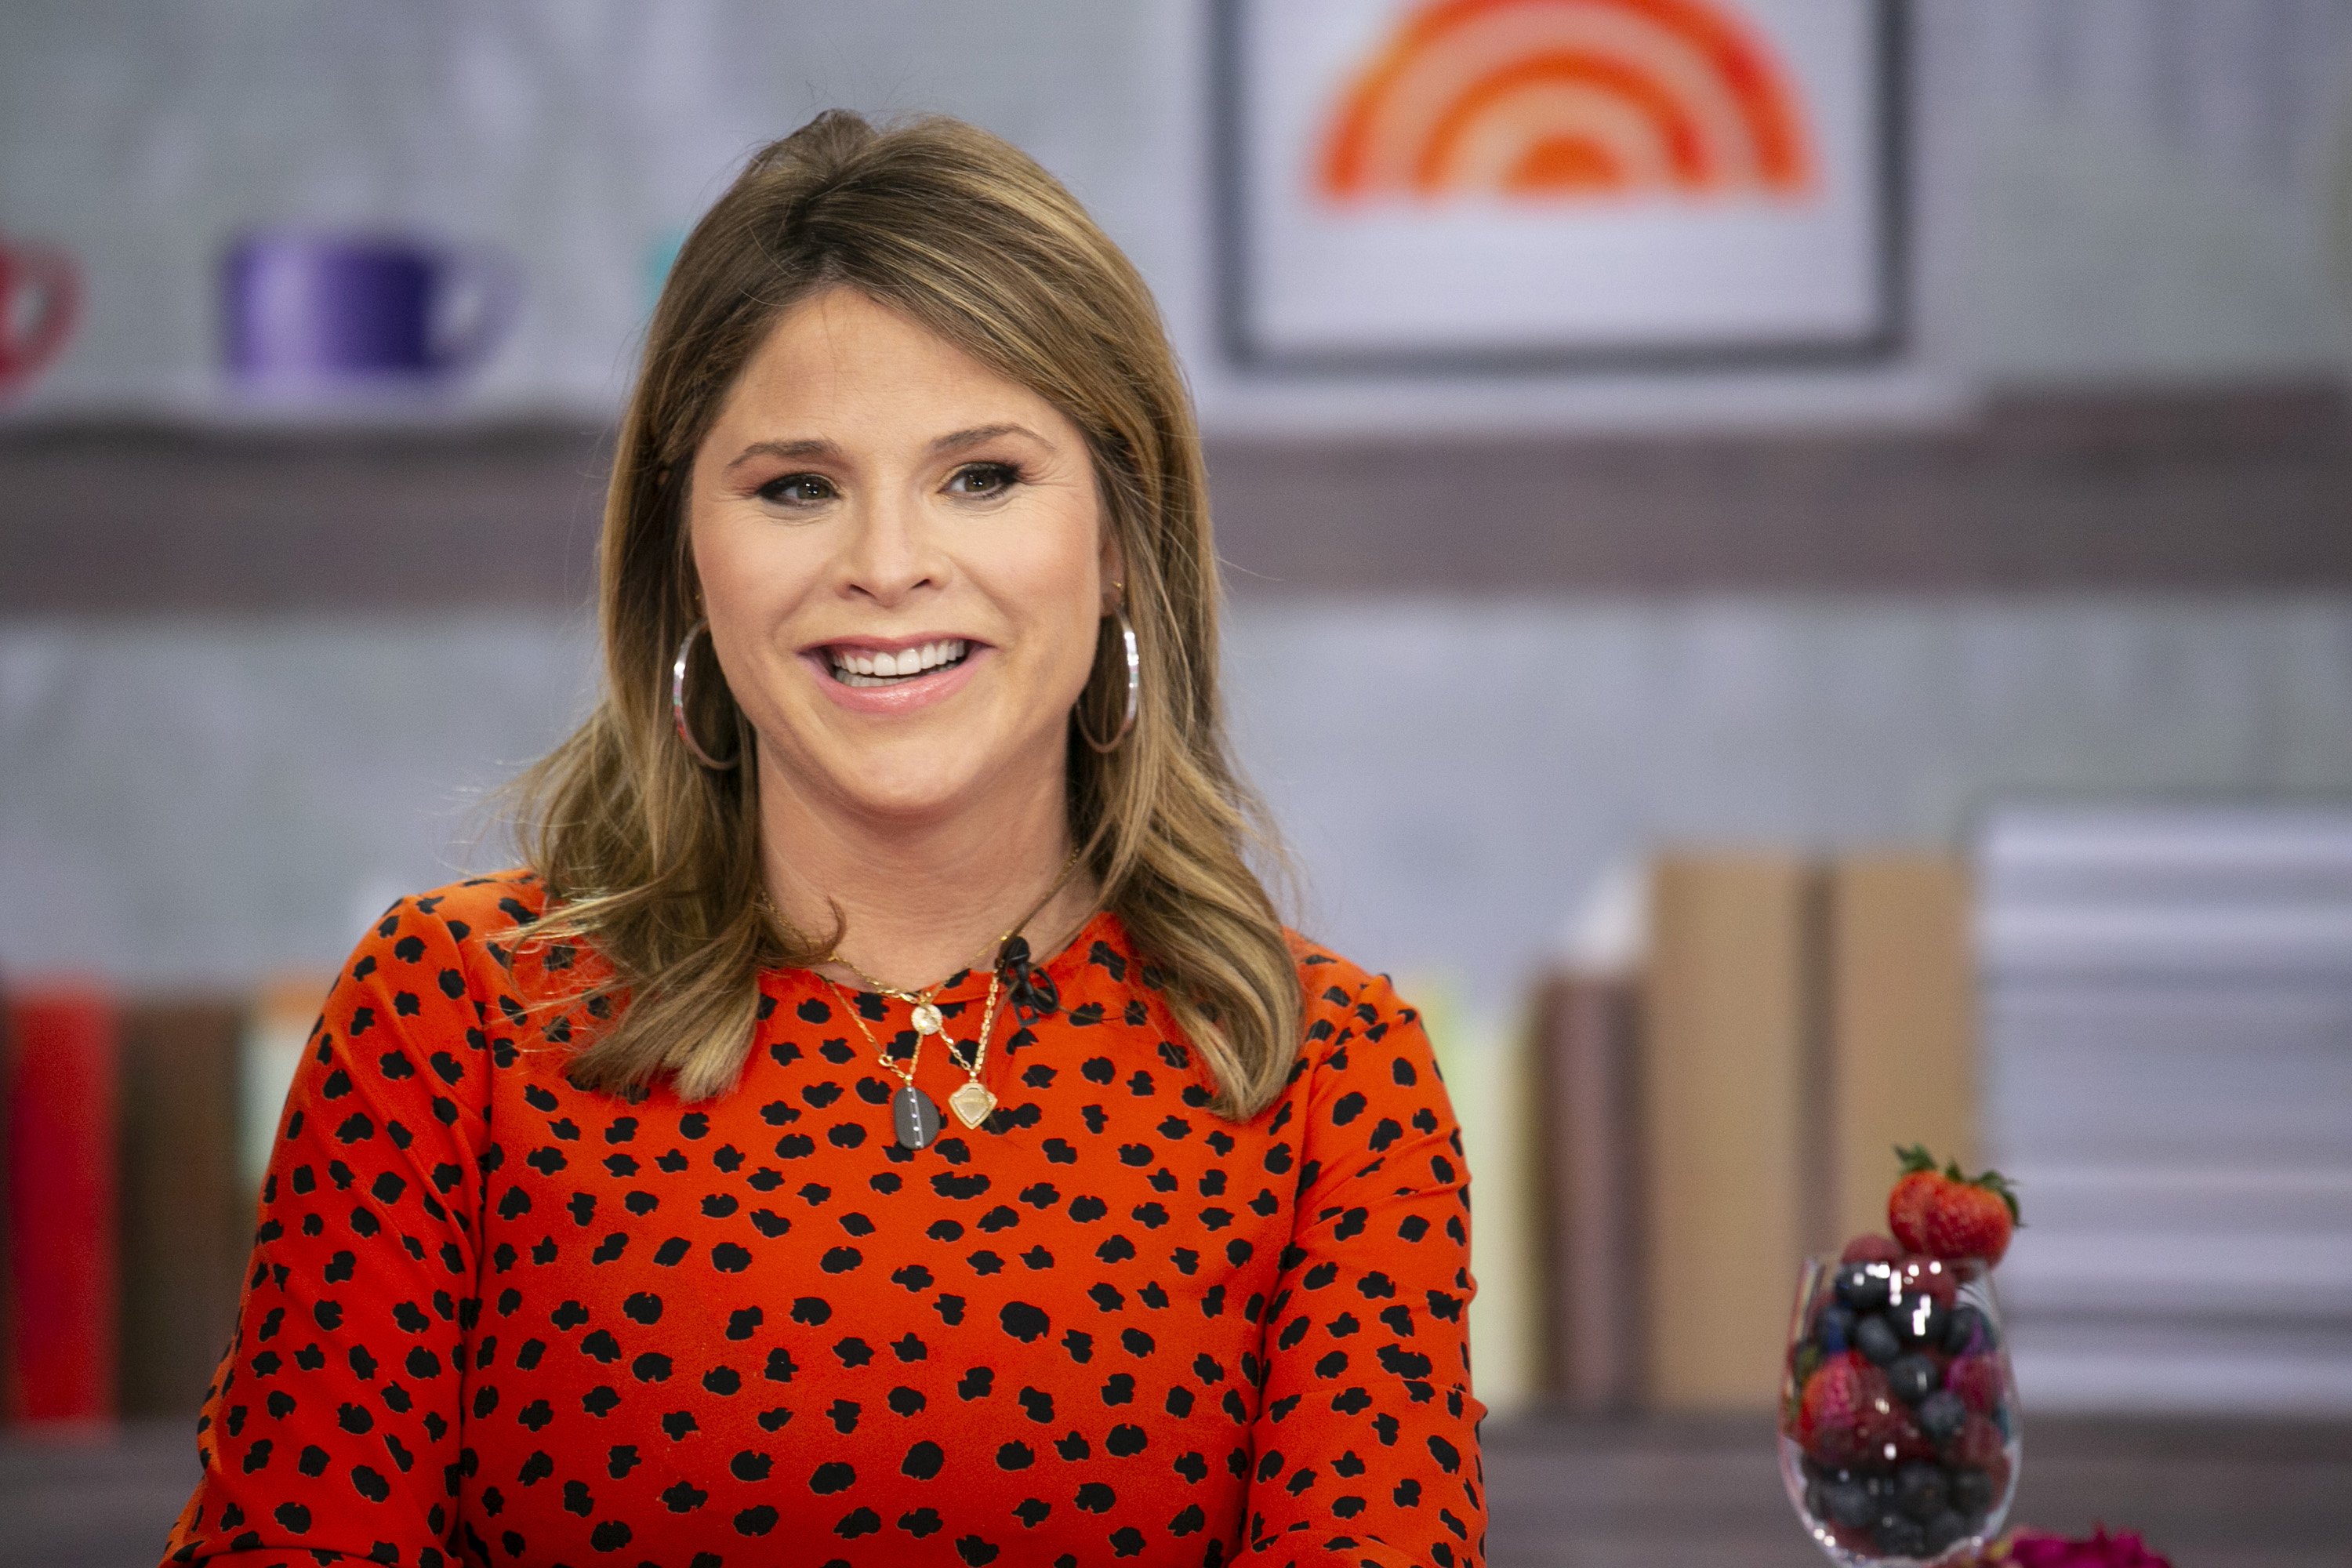 Jenna Bush Hager on the "Today" show on Monday May 13, 2019. | Source: Getty Images.